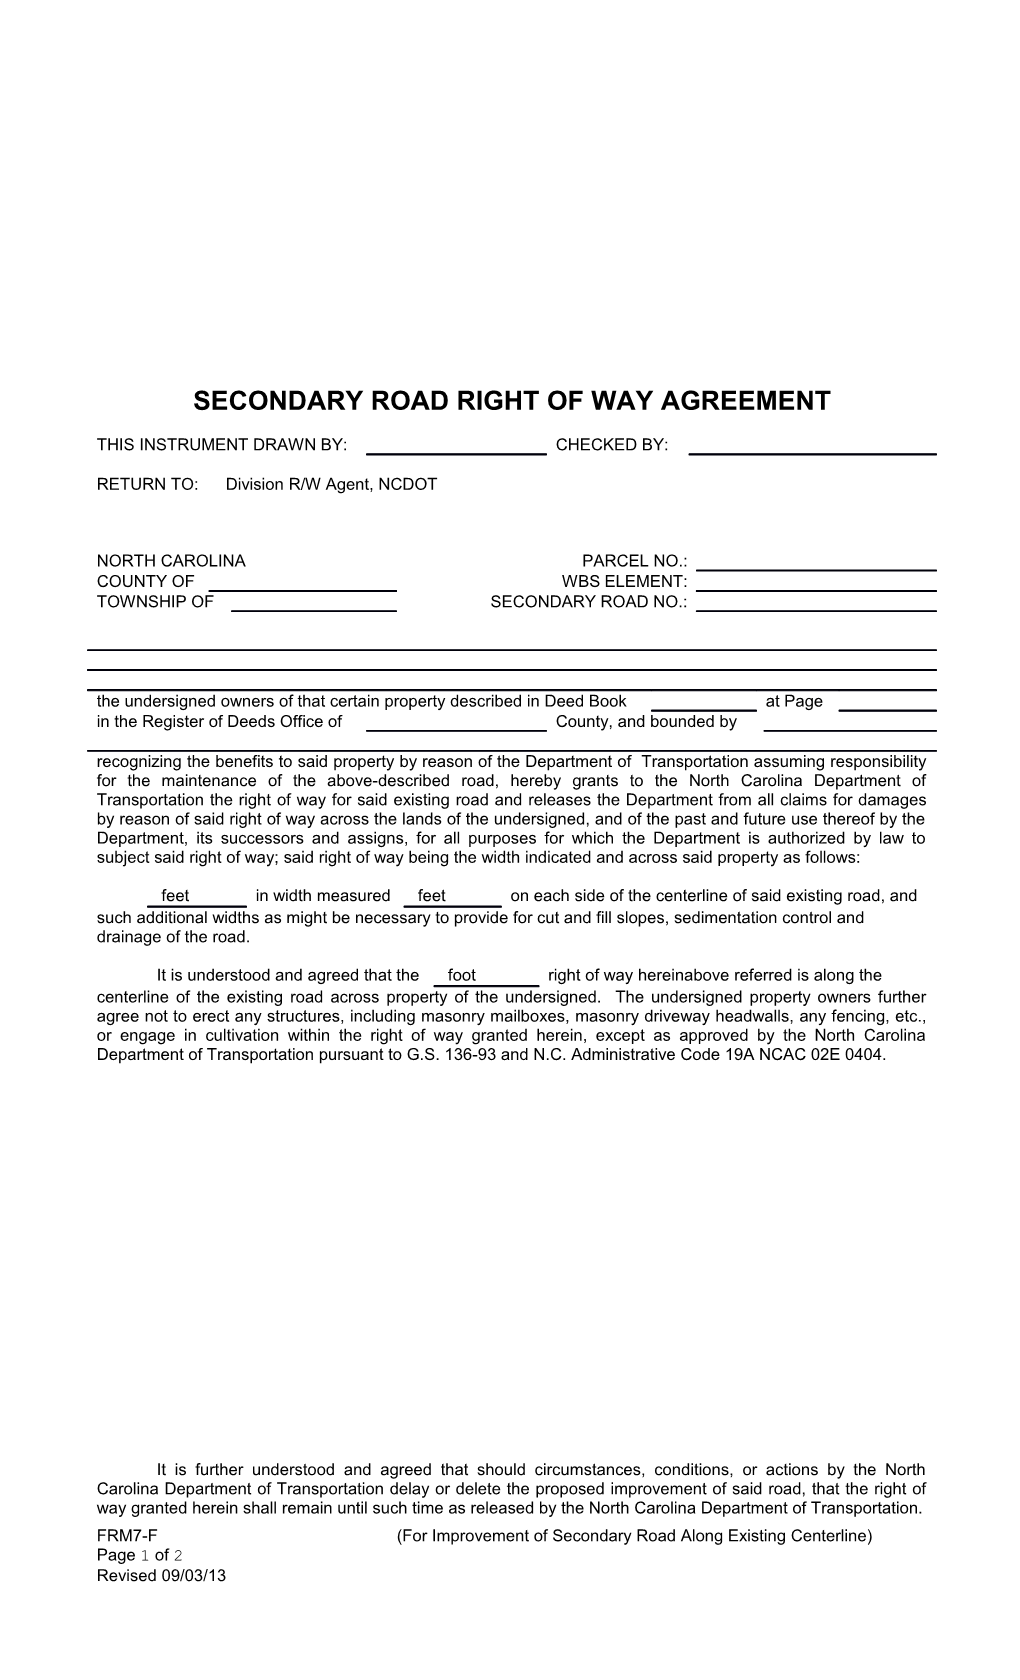 Secondary Road Right of Way Agreement (For Improvement of Secondary Road Along Existing